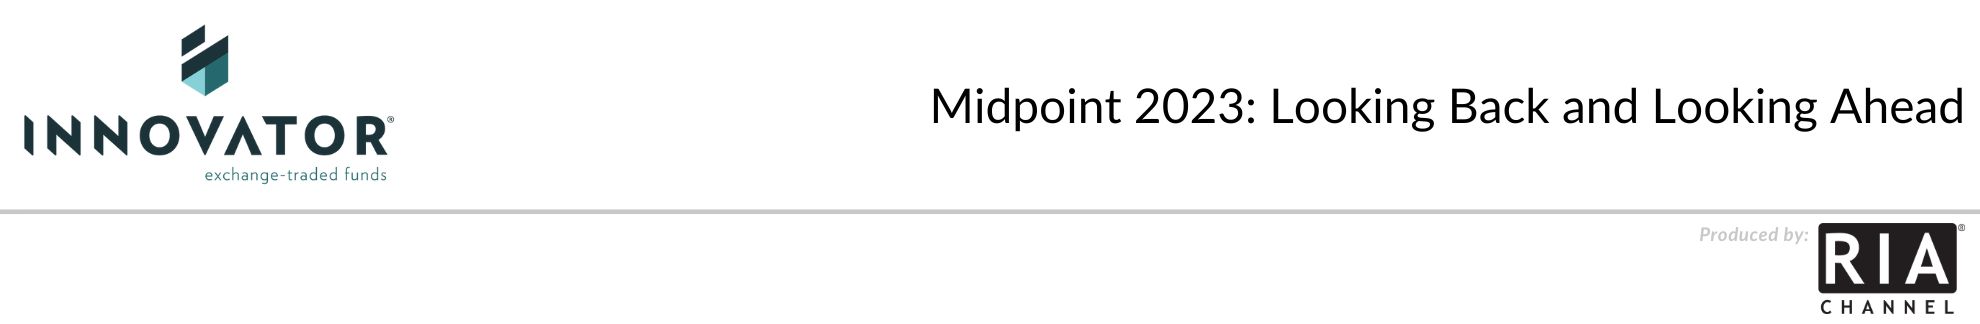 Midpoint 2023: Looking Back and Looking Ahead